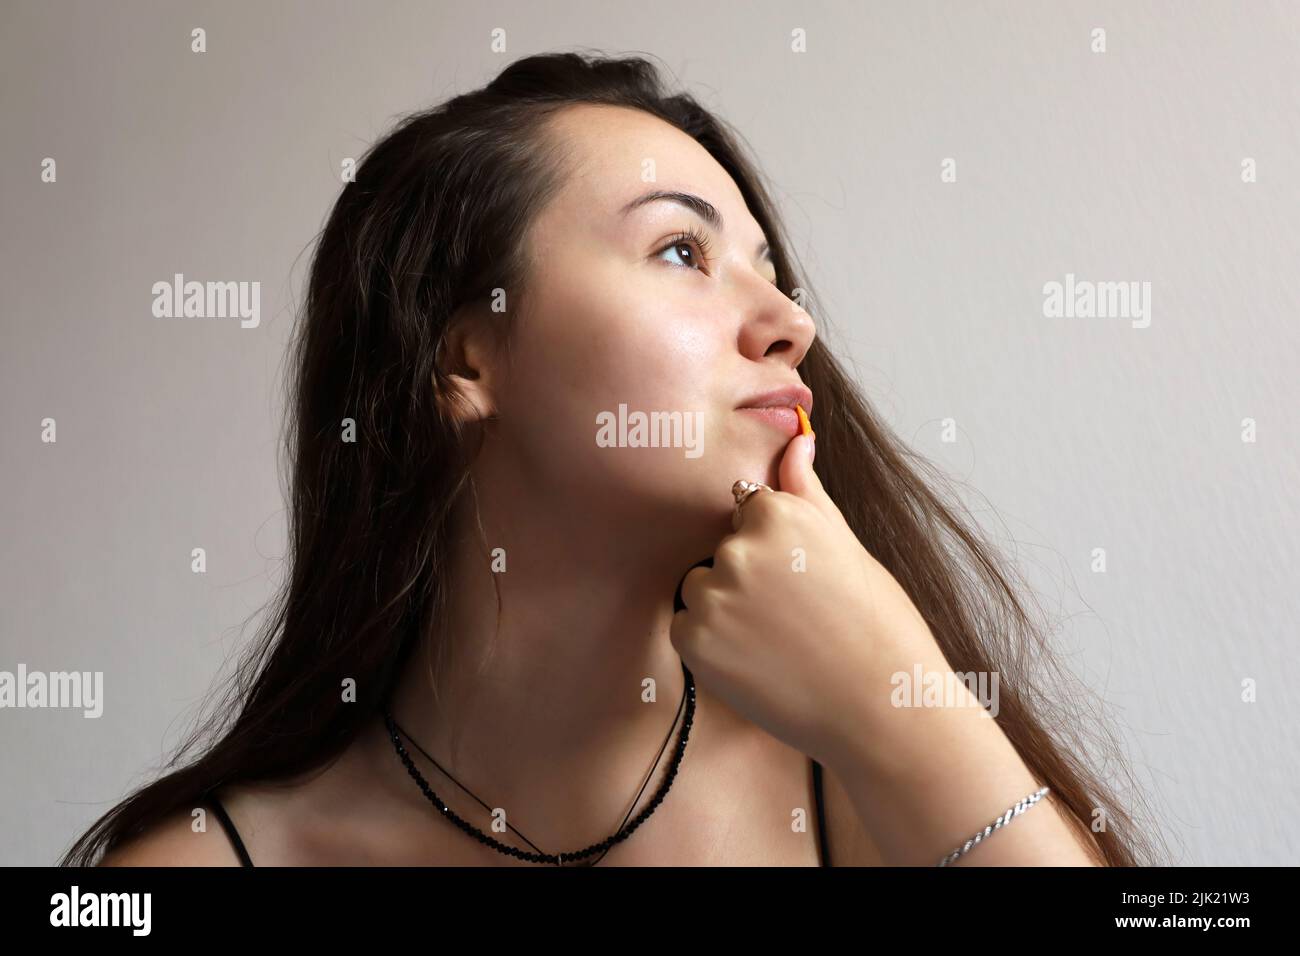 Portrait of attractive young girl with long hair touching her lips with acrylic nail. Concept of female beauty, skin and hair care Stock Photo